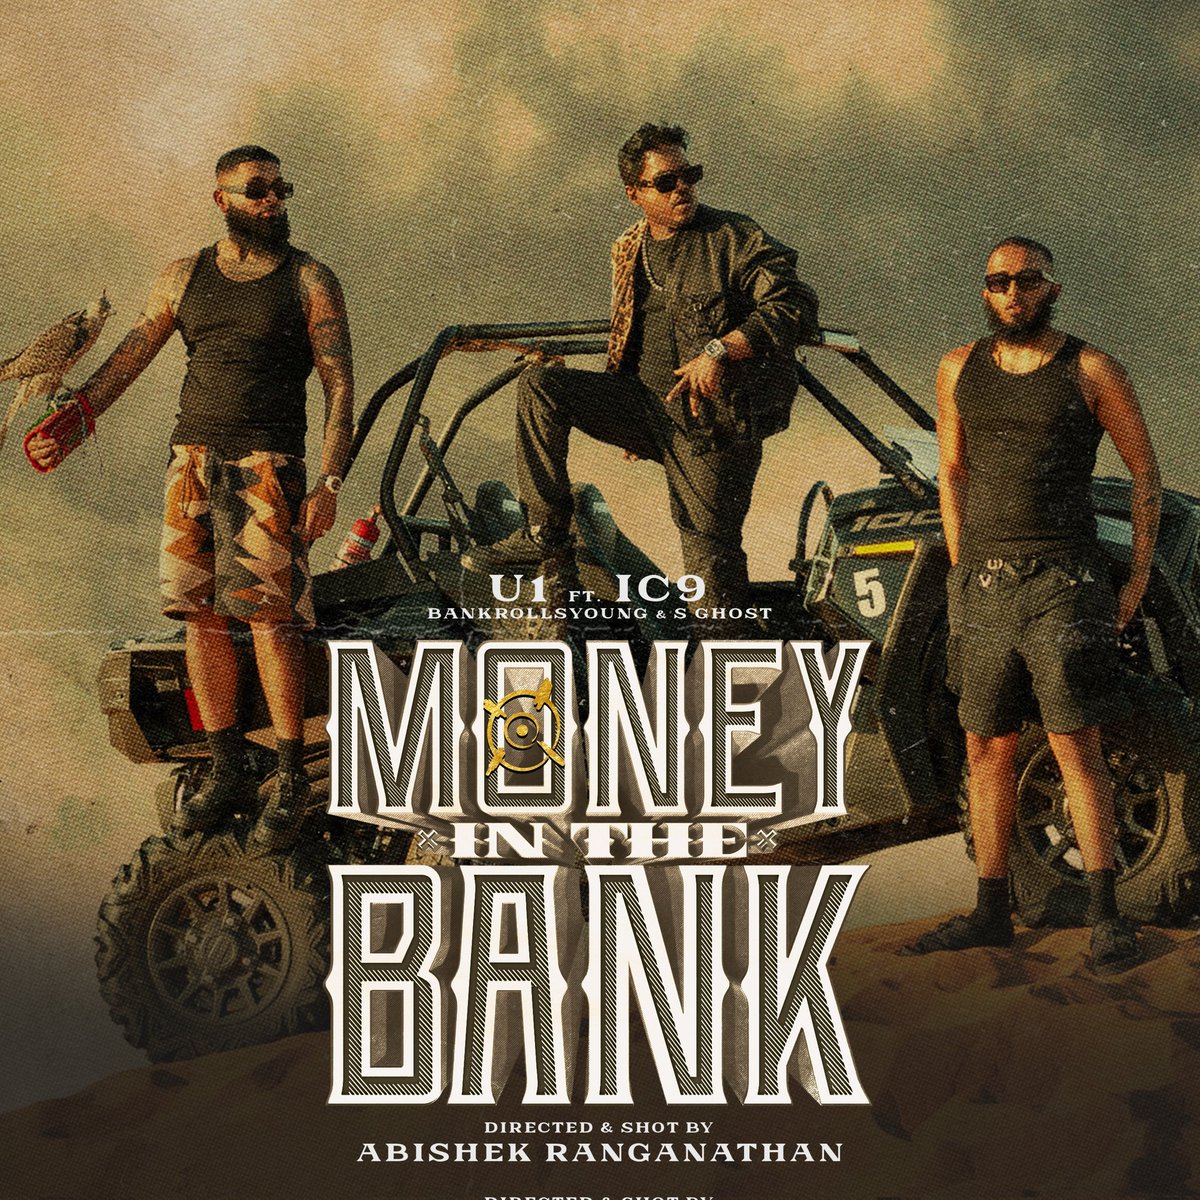 Yuvan Shankar Raja, one the great music directors of Tamil music, continues to break boundaries with his latest Independent release, 'Money In The Bank' 

youtu.be/41W7sRc5wps?si…

@thisisysr @u1records #IndieMusic #YuvanMagic #Yuvan #IndependentSong